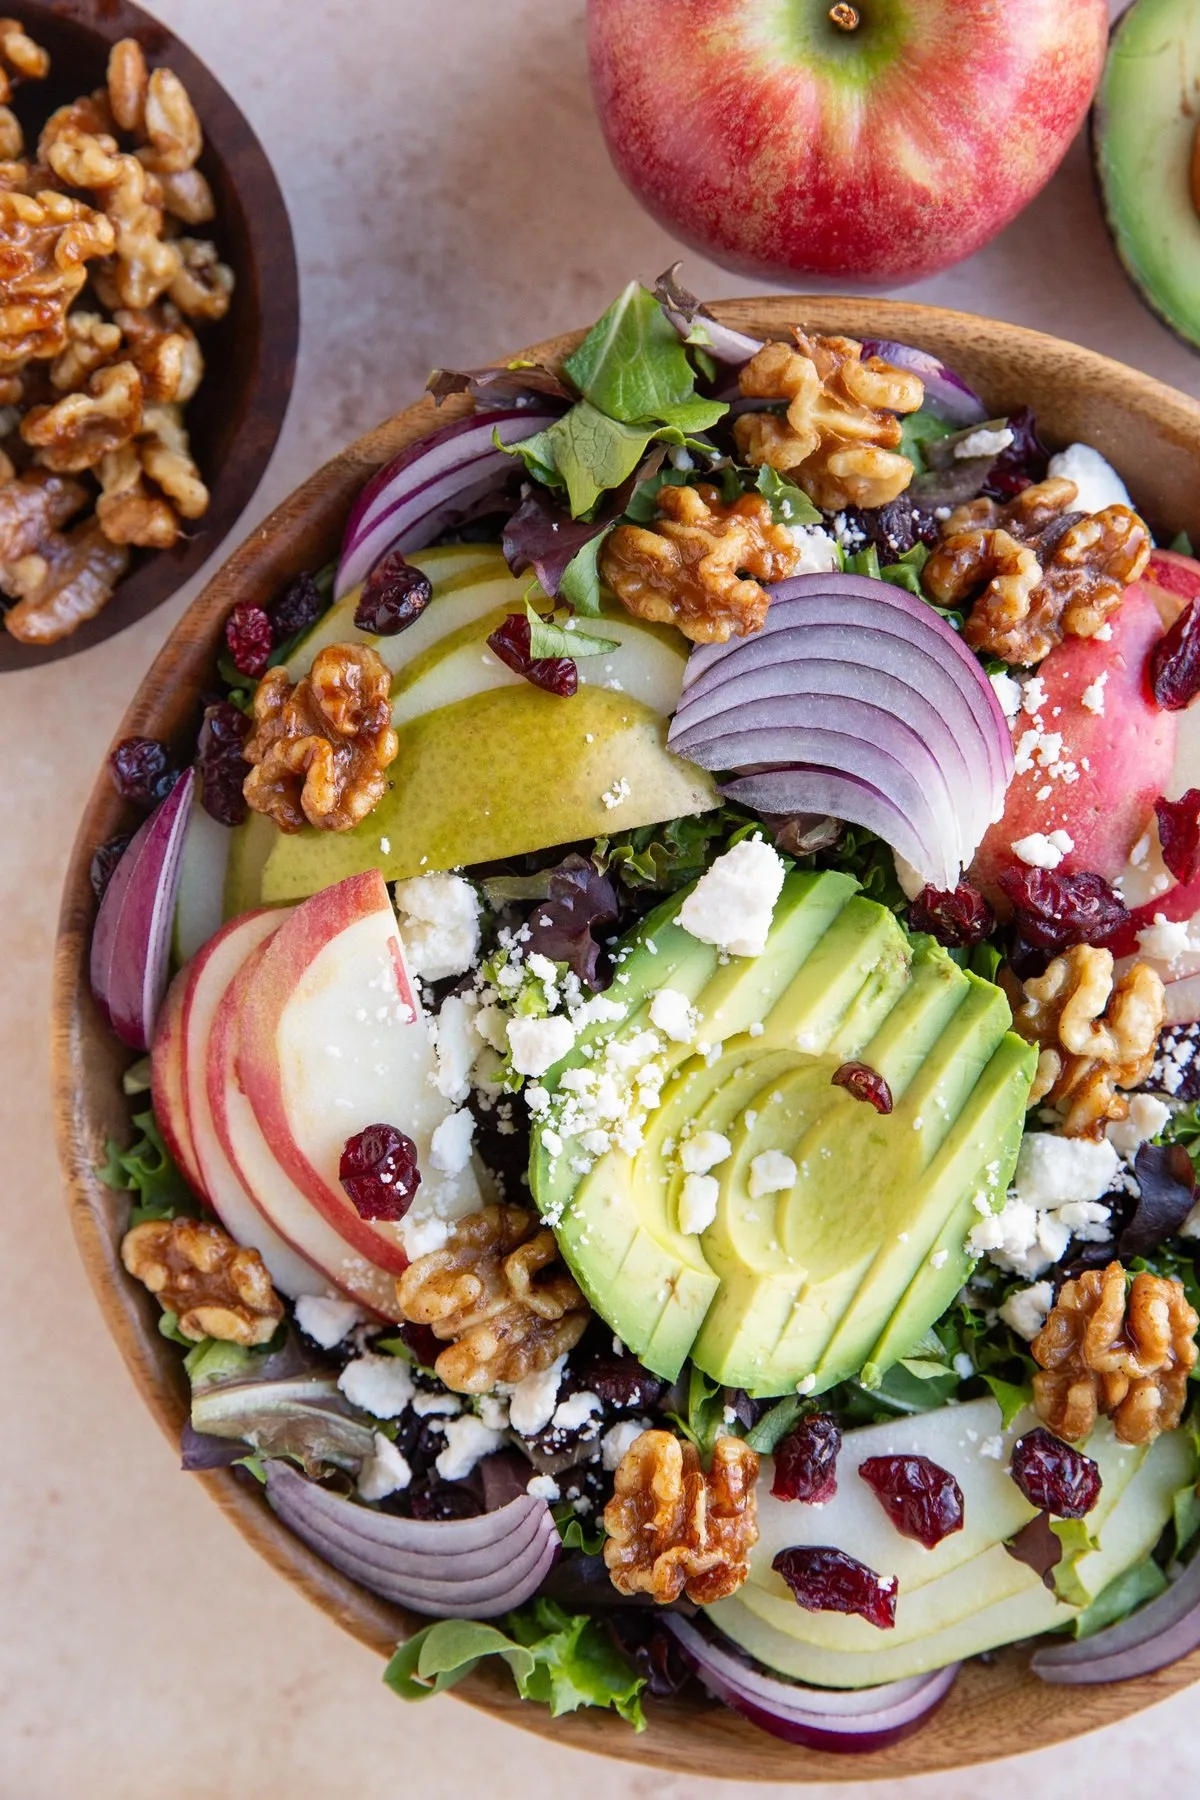 Pear Apple Avocado Spinach Salad with Candied Walnuts, Feta, and Balsamic Vinaigrette